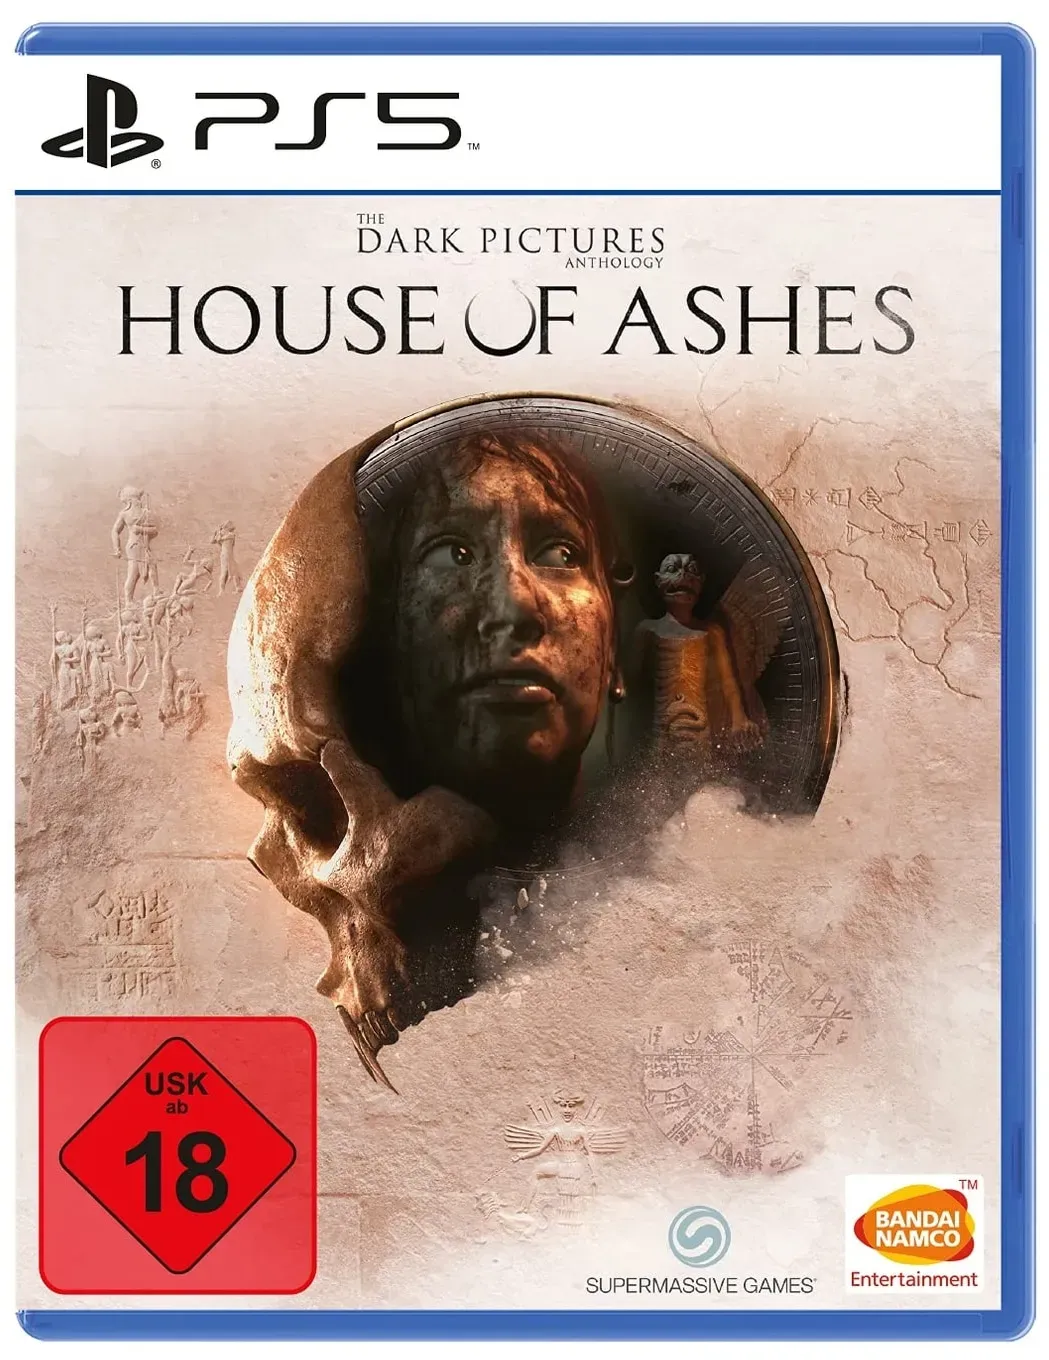 The Dark Pictures Anthology; House of Ashes